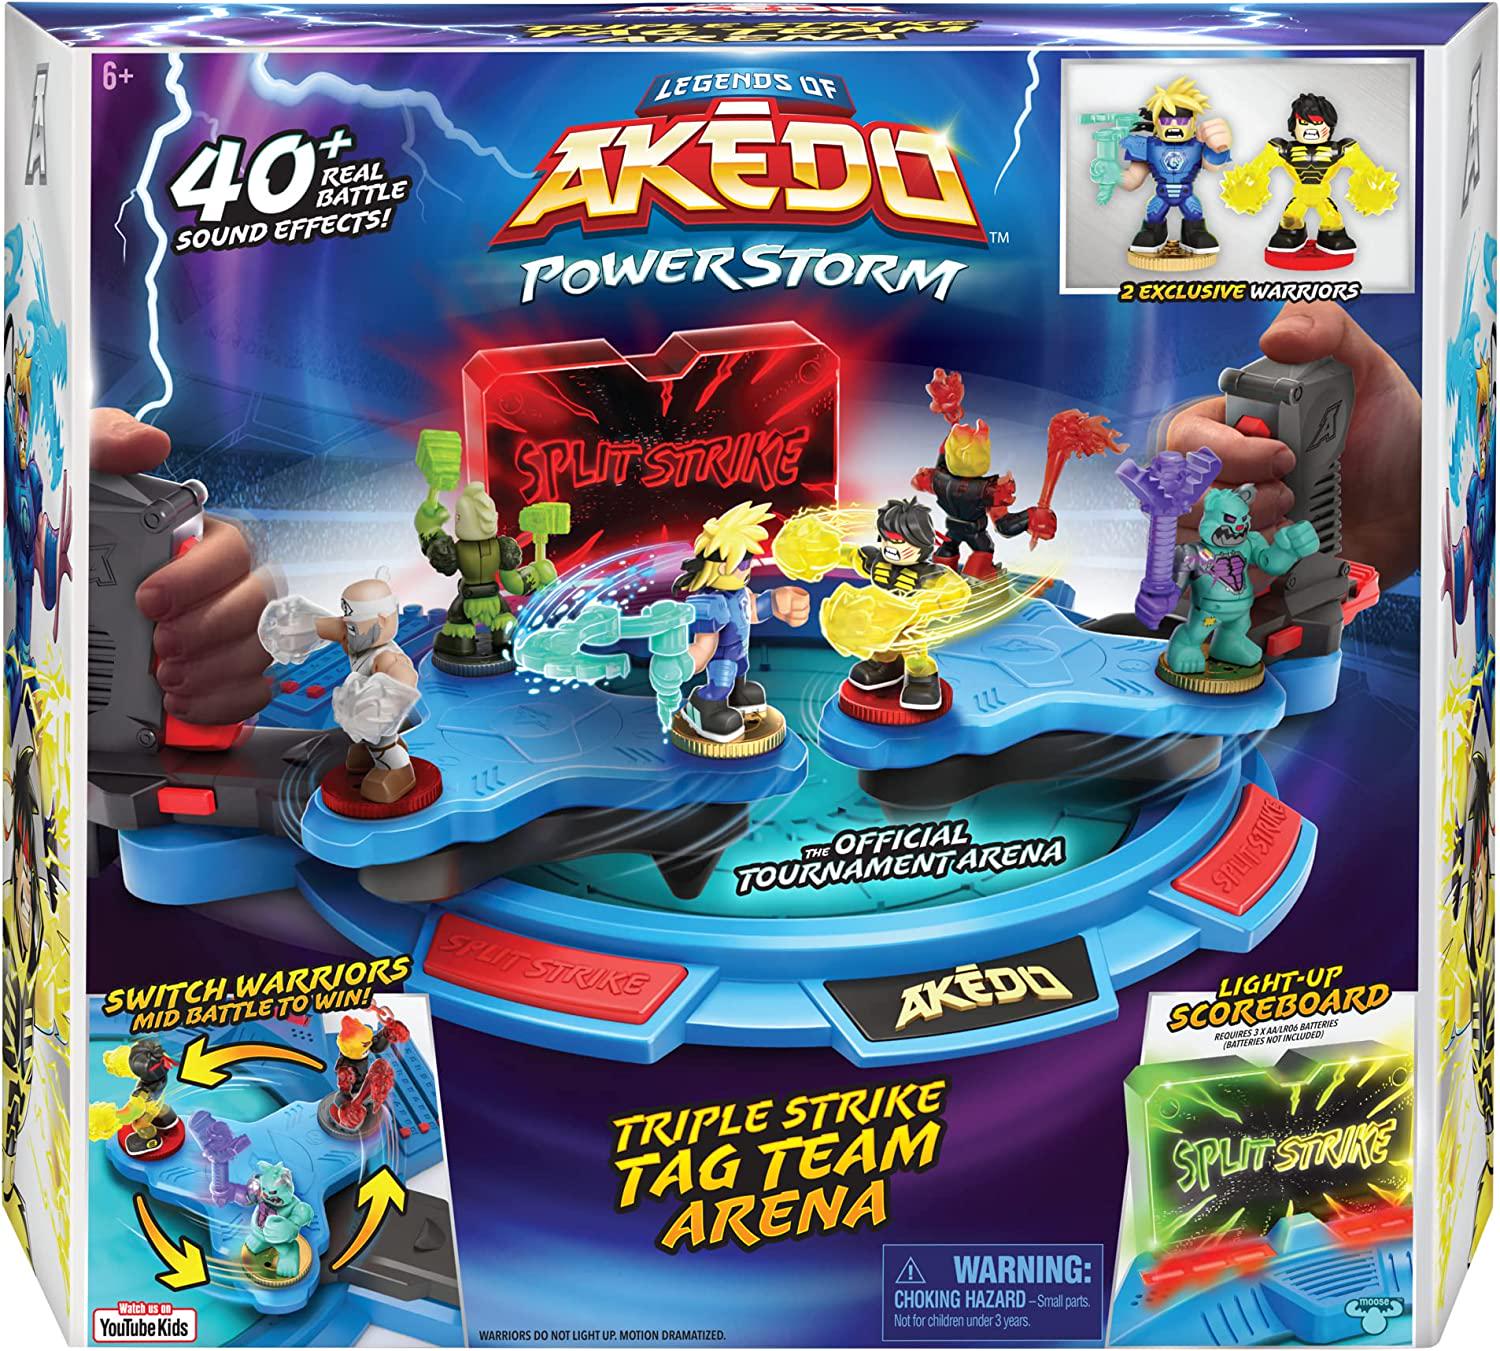 Akedo, Legends of Akedo Powerstorm Ultimate Battle Arena with 35+ Battle Sound Effects and 2 Exclusive Battling Mini Warriors